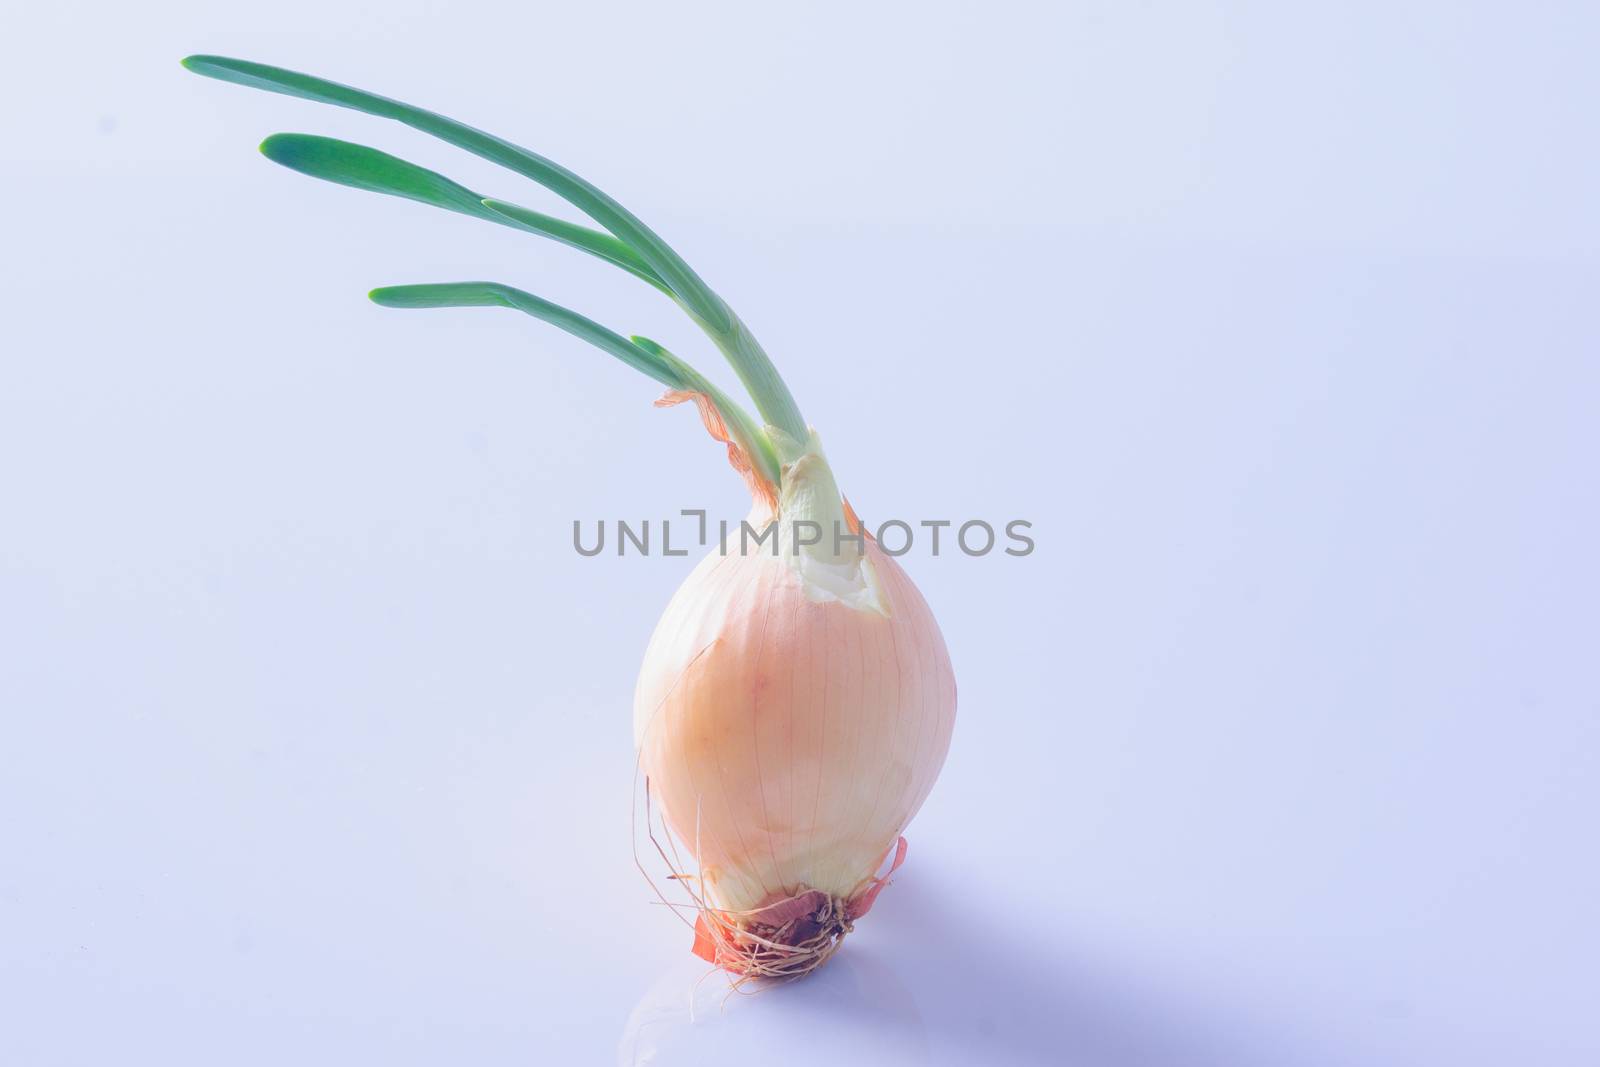 An onion on a white background